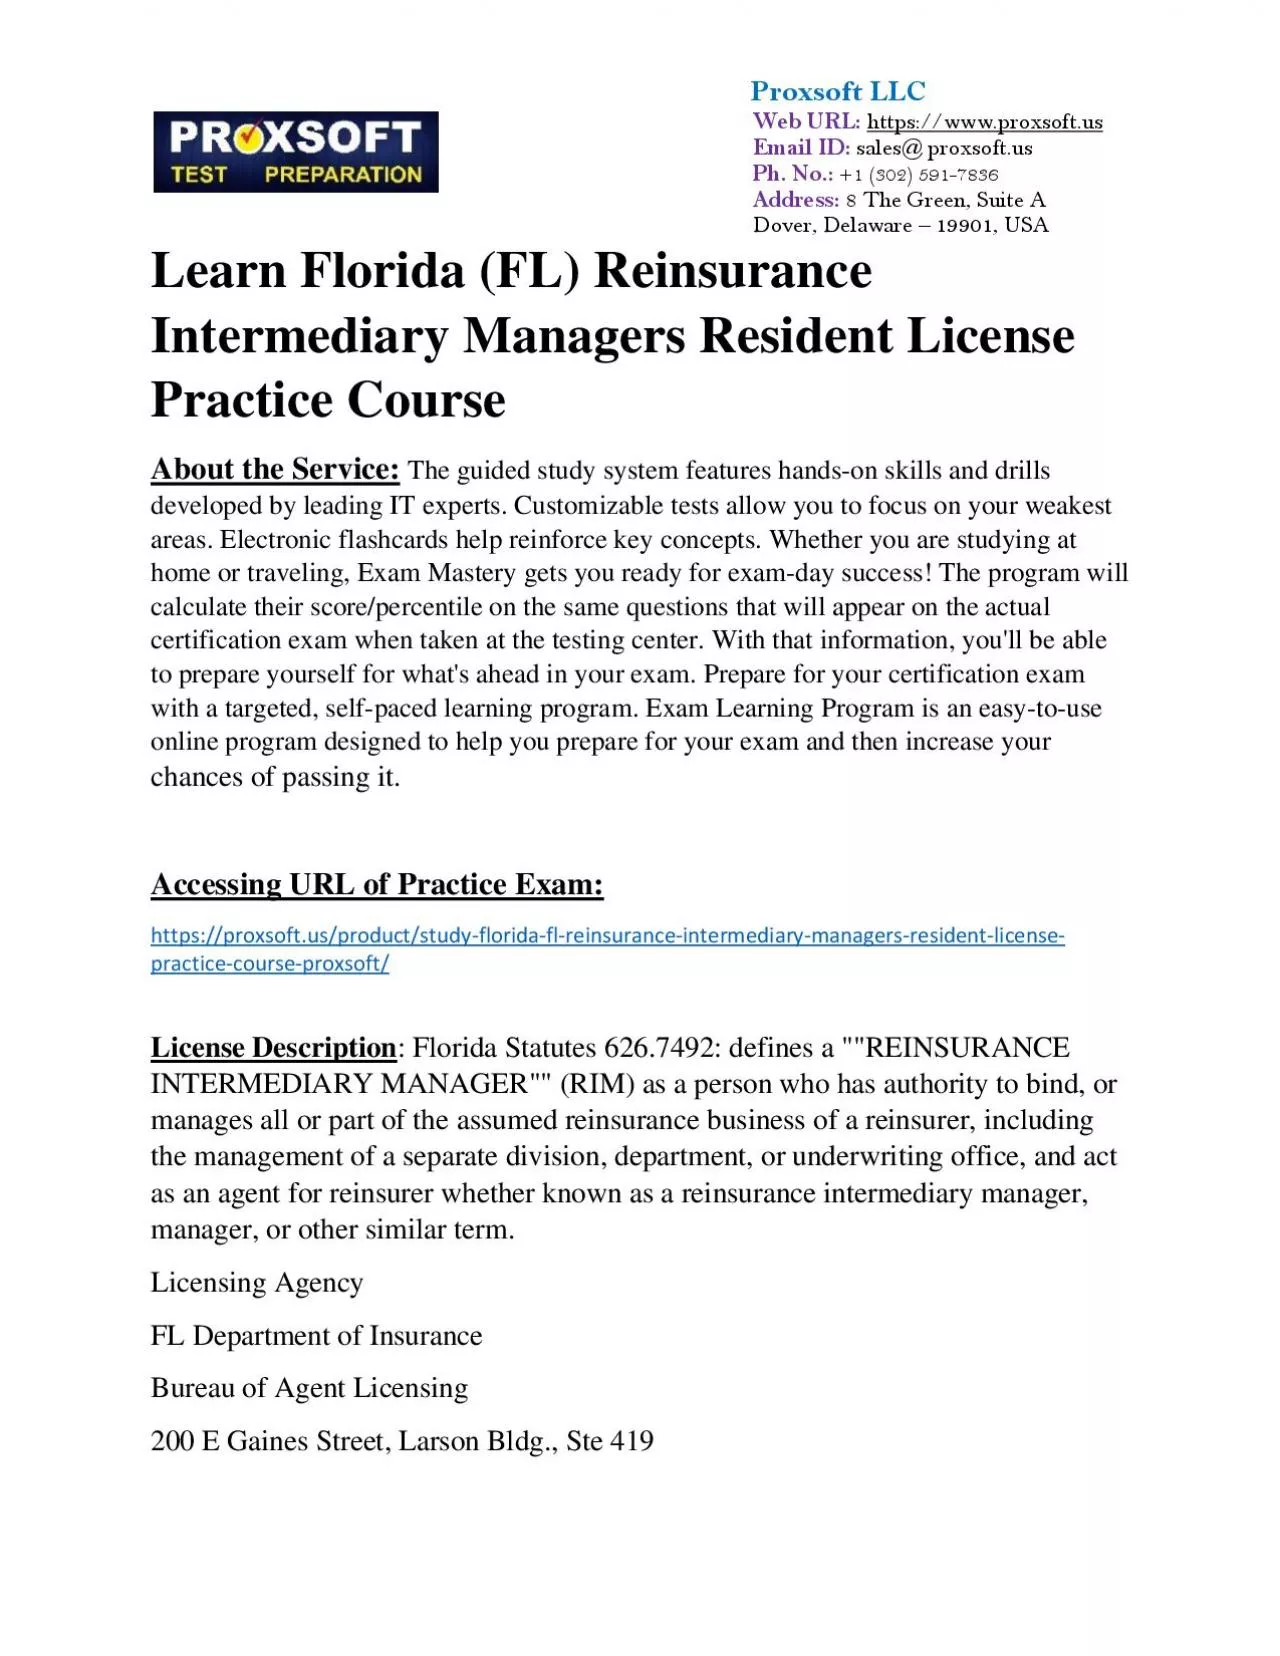 Learn Florida (FL) Reinsurance Intermediary Managers Resident License Practice Course